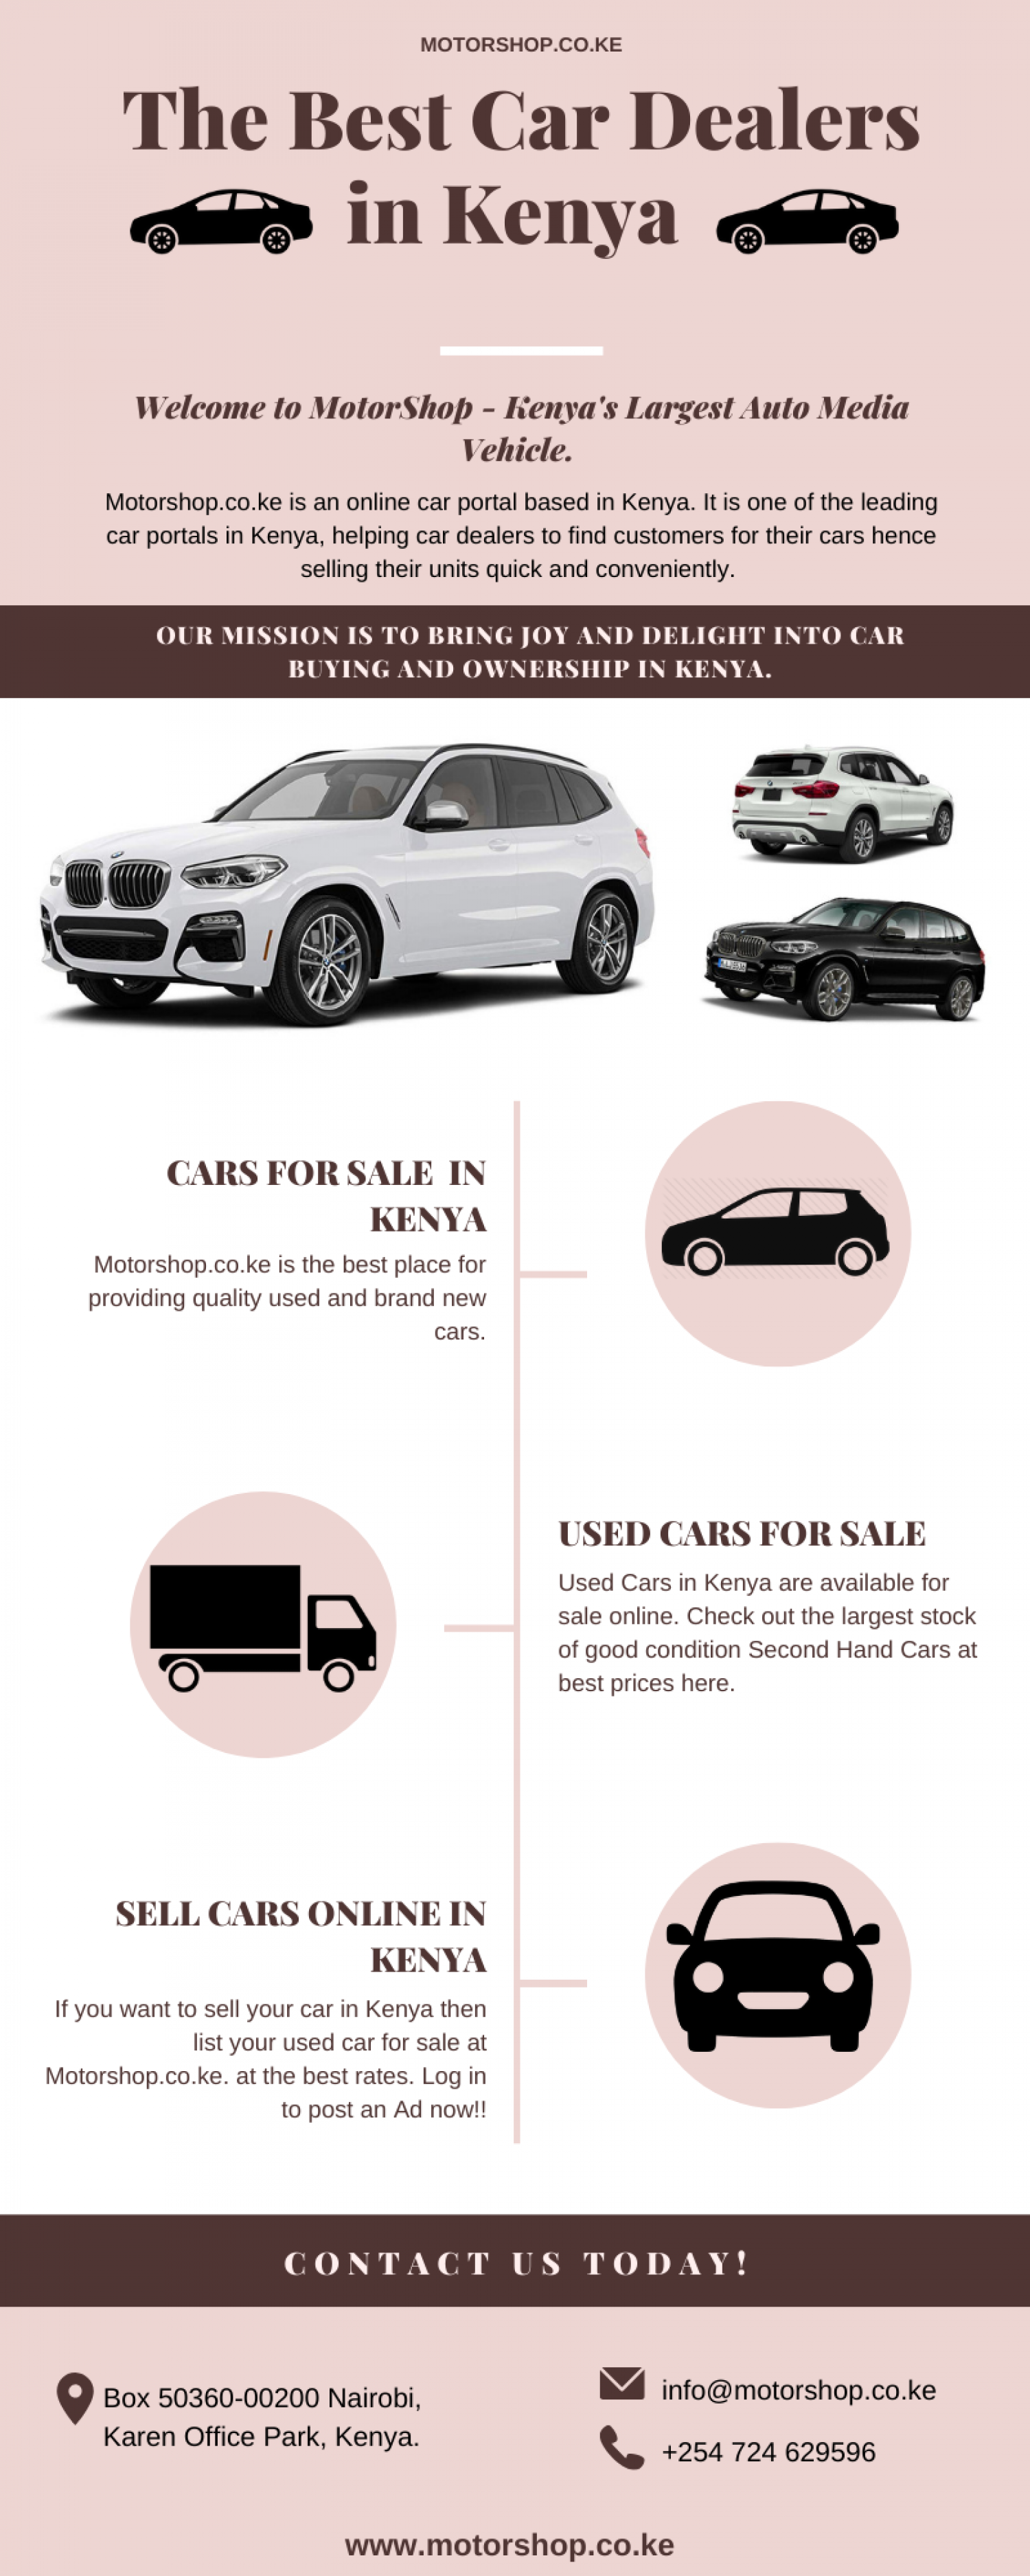 Car Dealers In Kenya | Used Cars For Sale | Sell Cars Online Infographic